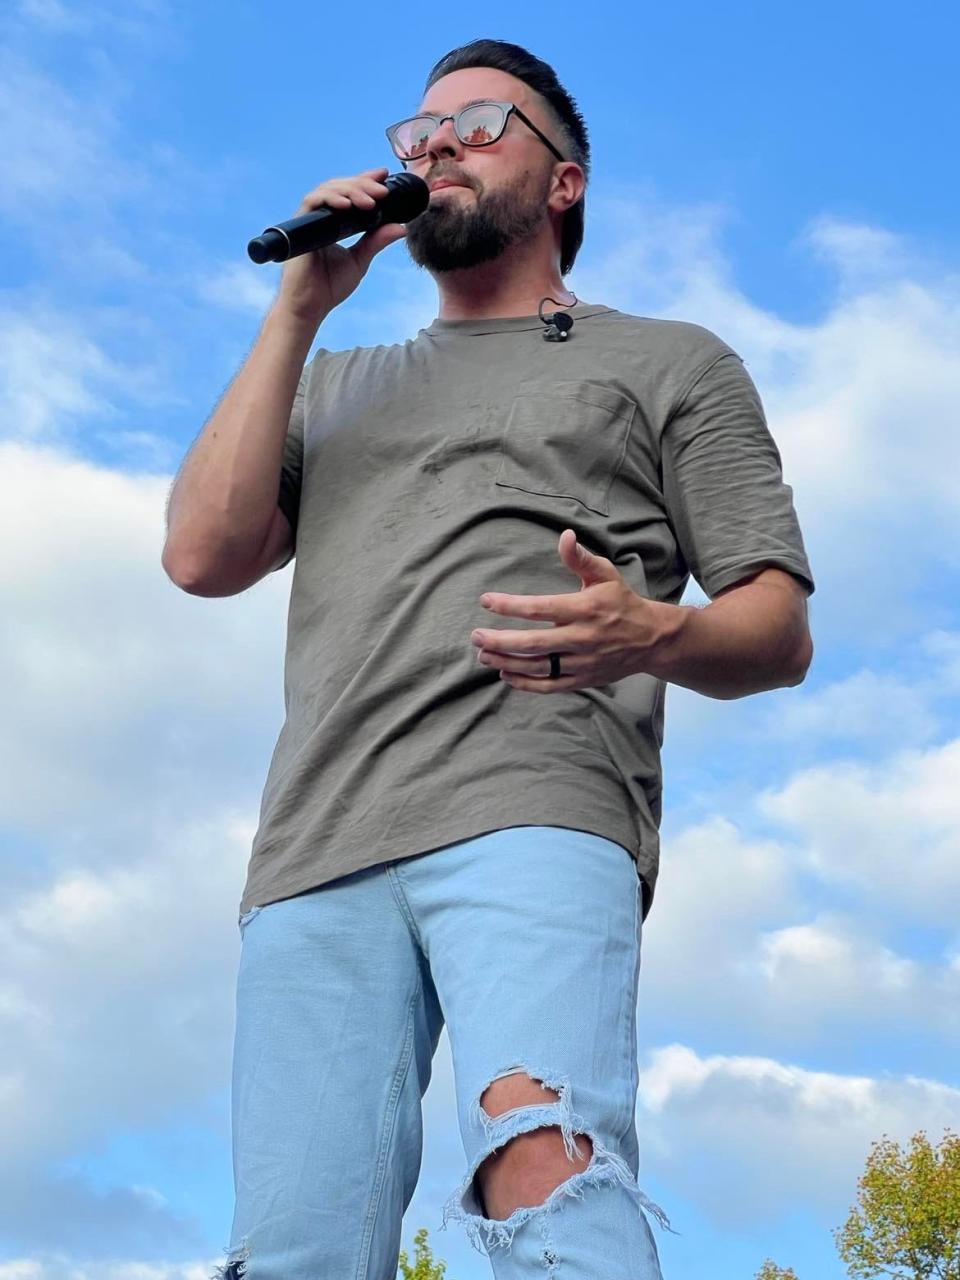 Danny Gokey kicked off the 2022 Alive Music Festival on Thursday at Atwood Lake Park, which is located at the boundaries of Carroll and Tuscarawas counties near Mineral City and Somerdale.